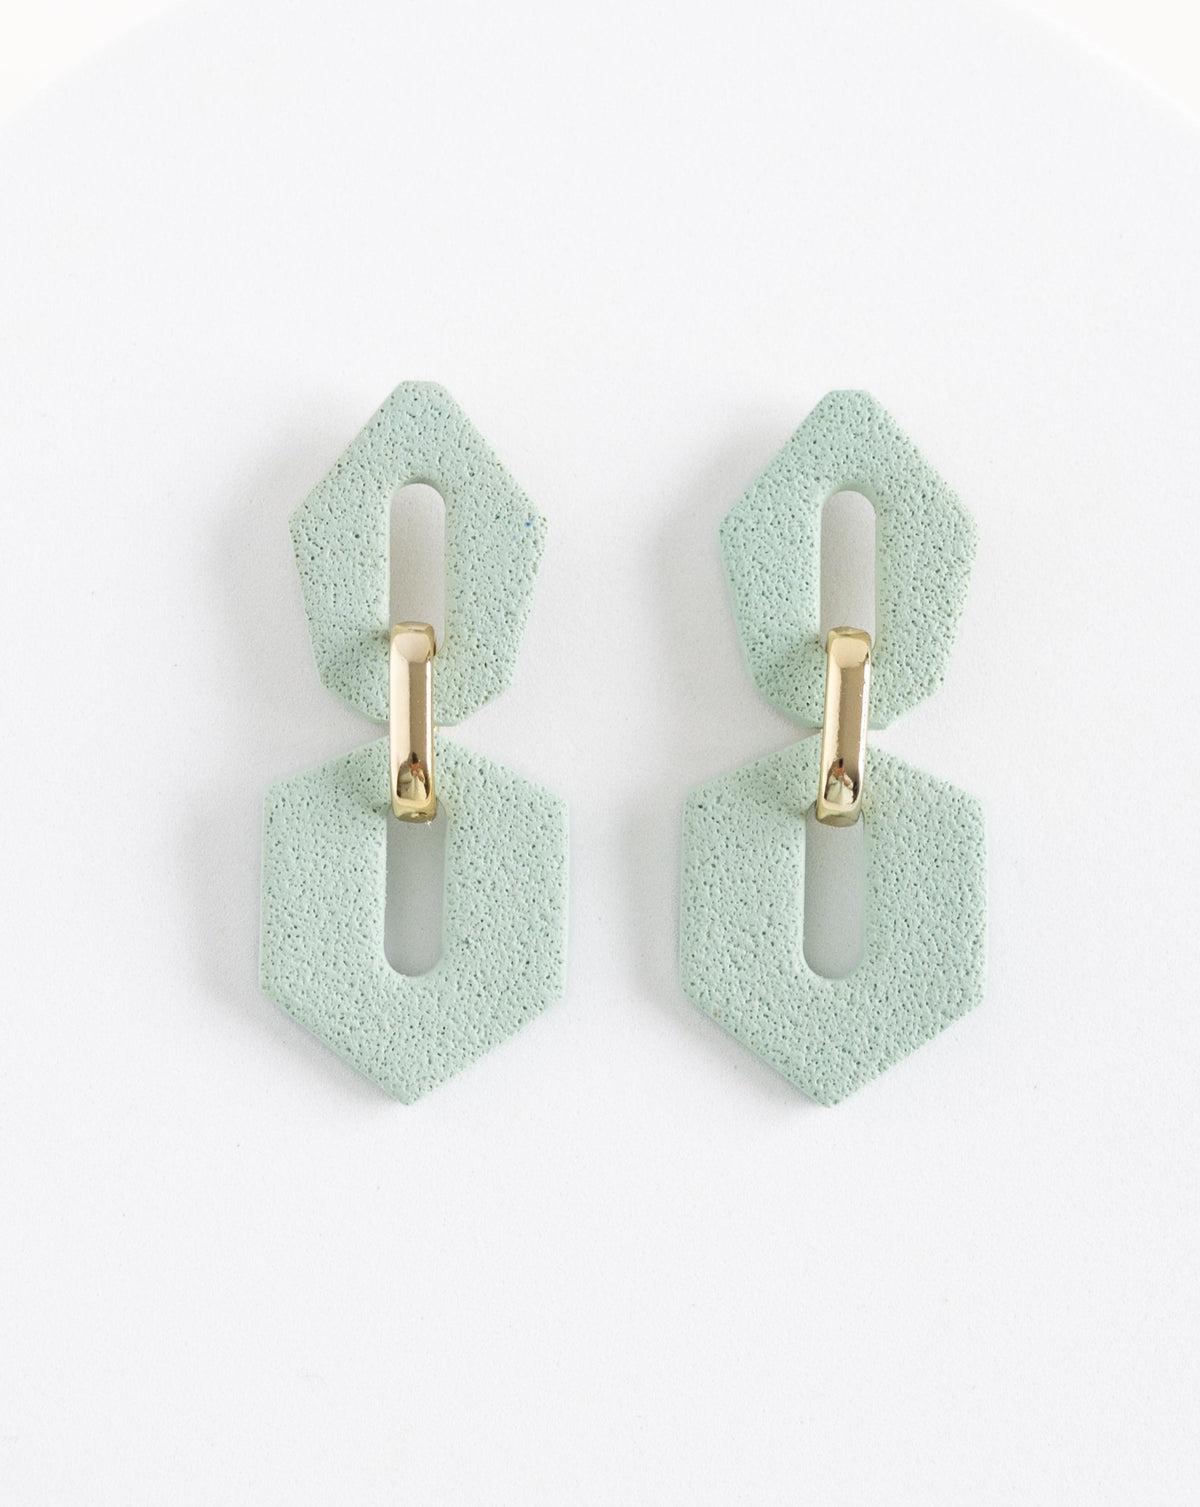 Front view of Shilla earrings in Sage color.